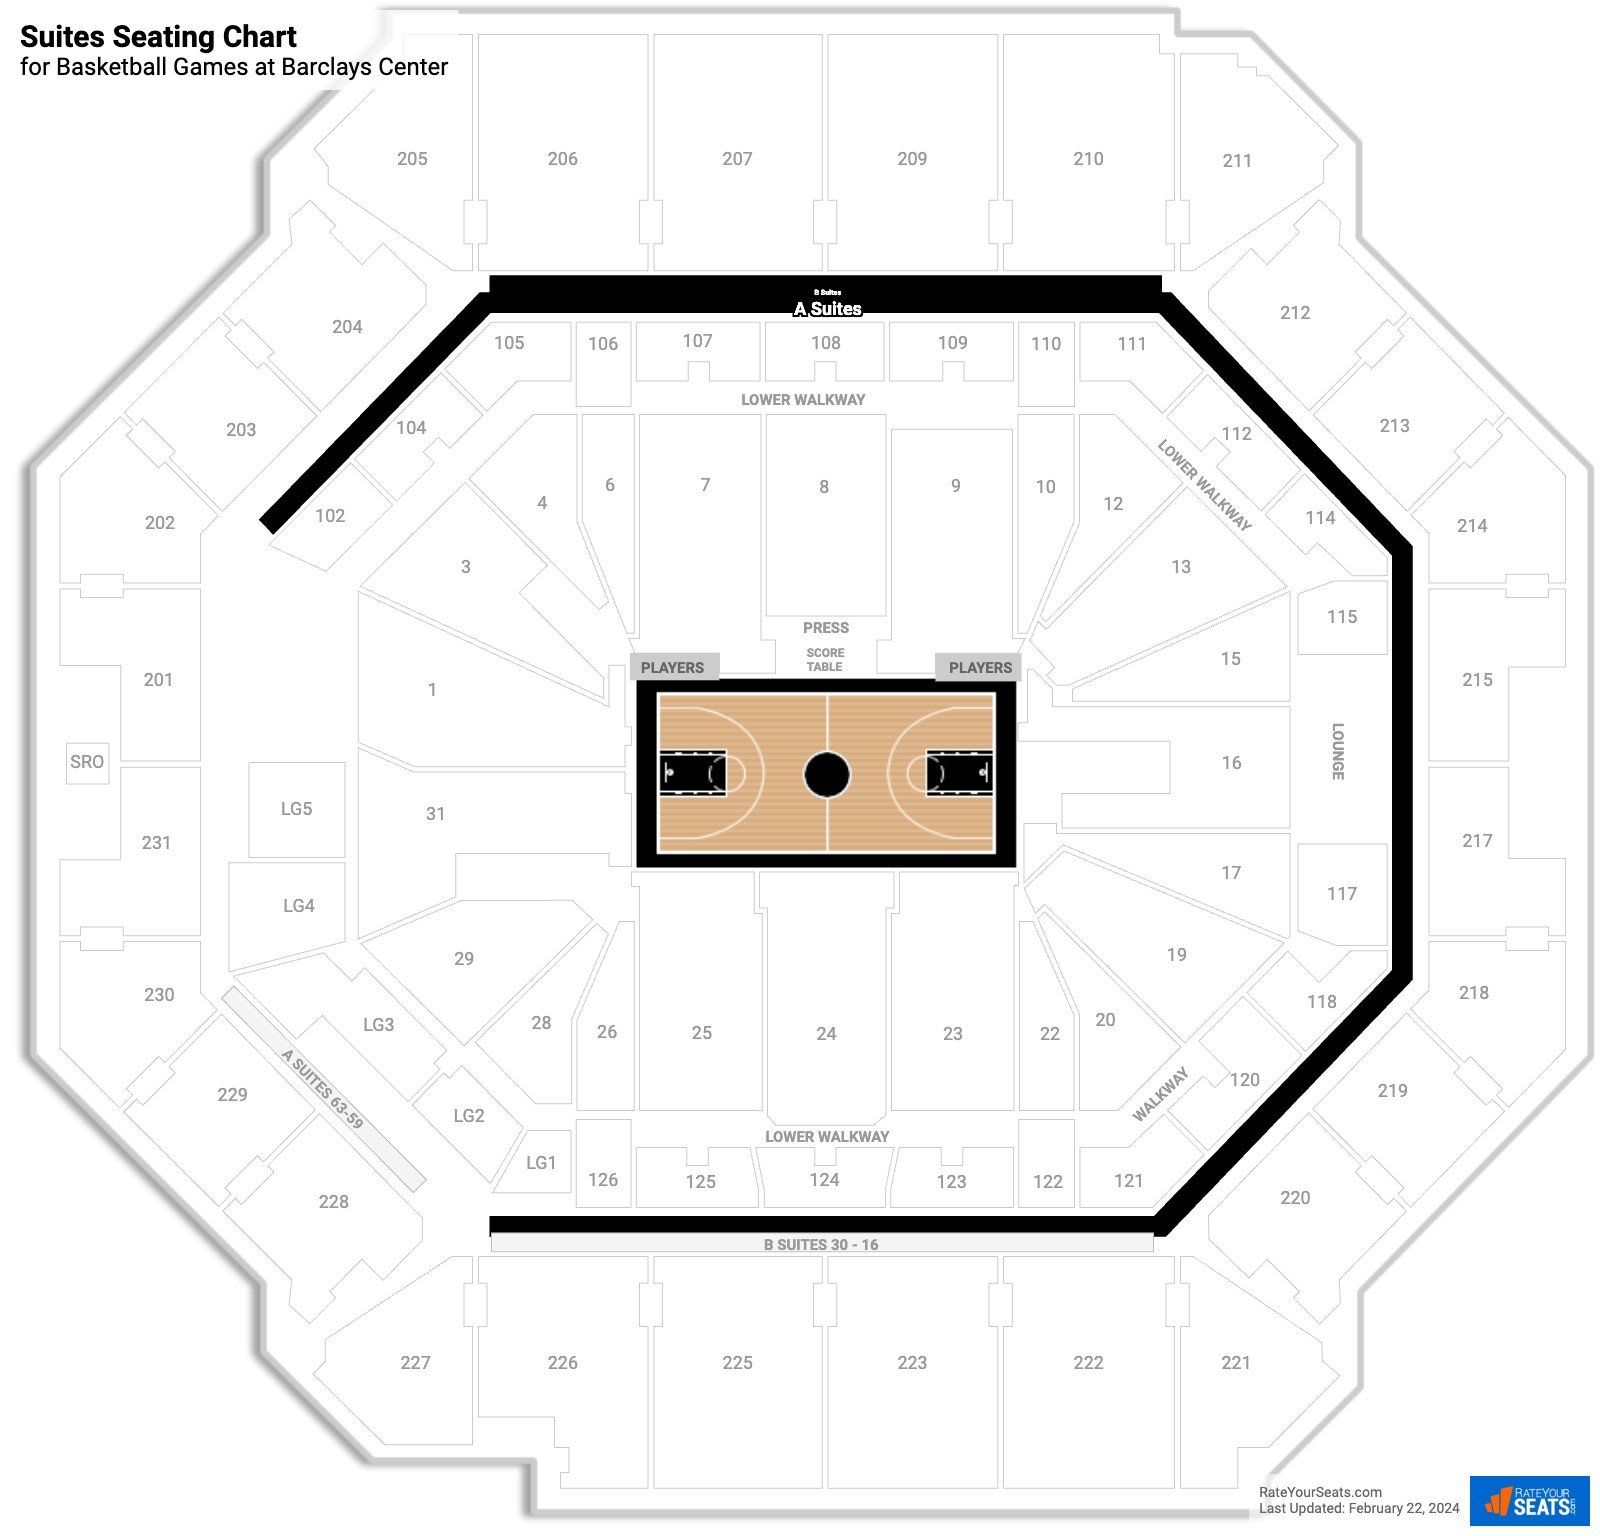 Basketball Suites Seating Chart at Barclays Center